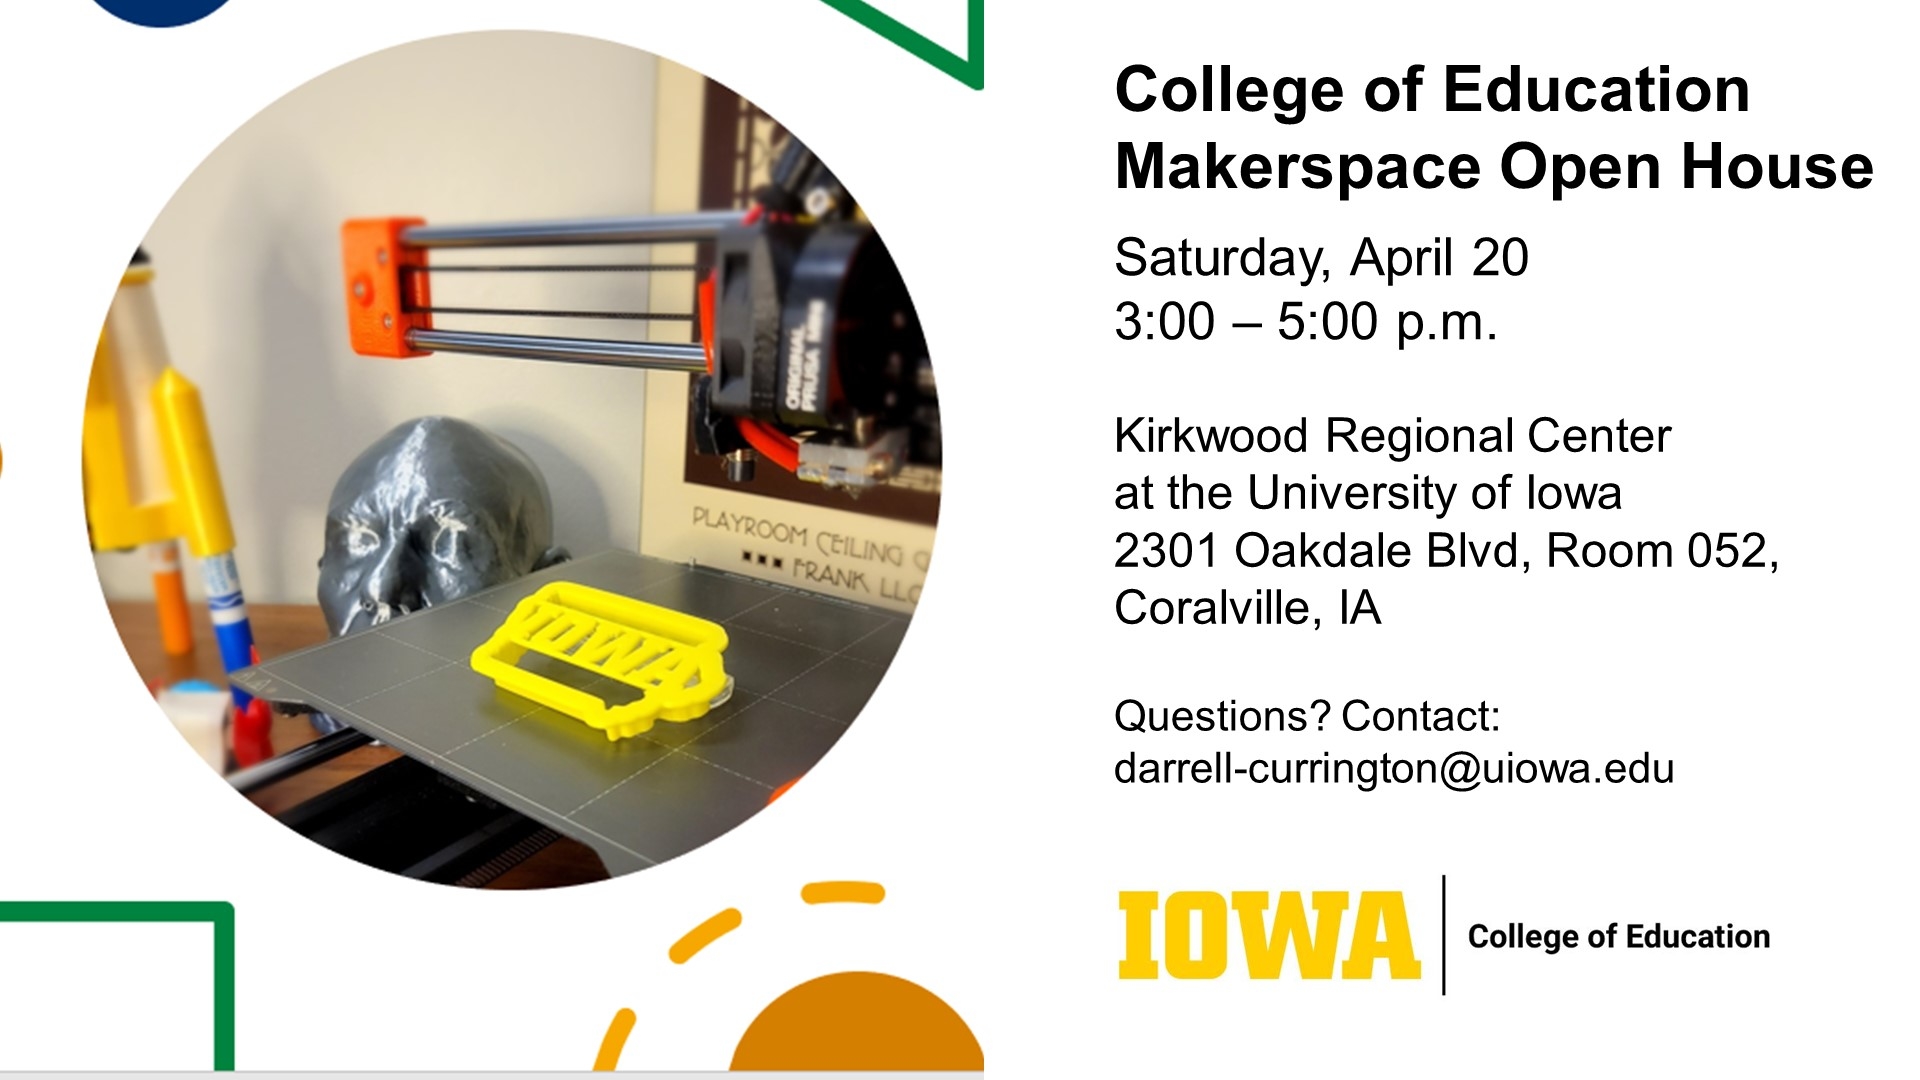 College of Education Makerspace Open House. 4/20, 3-5p, Kirkwood Regional Center , 2301 Oakdale Blvd, Room 052, Coralville. Questions? Contact: darrell-currington@uiowa.edu